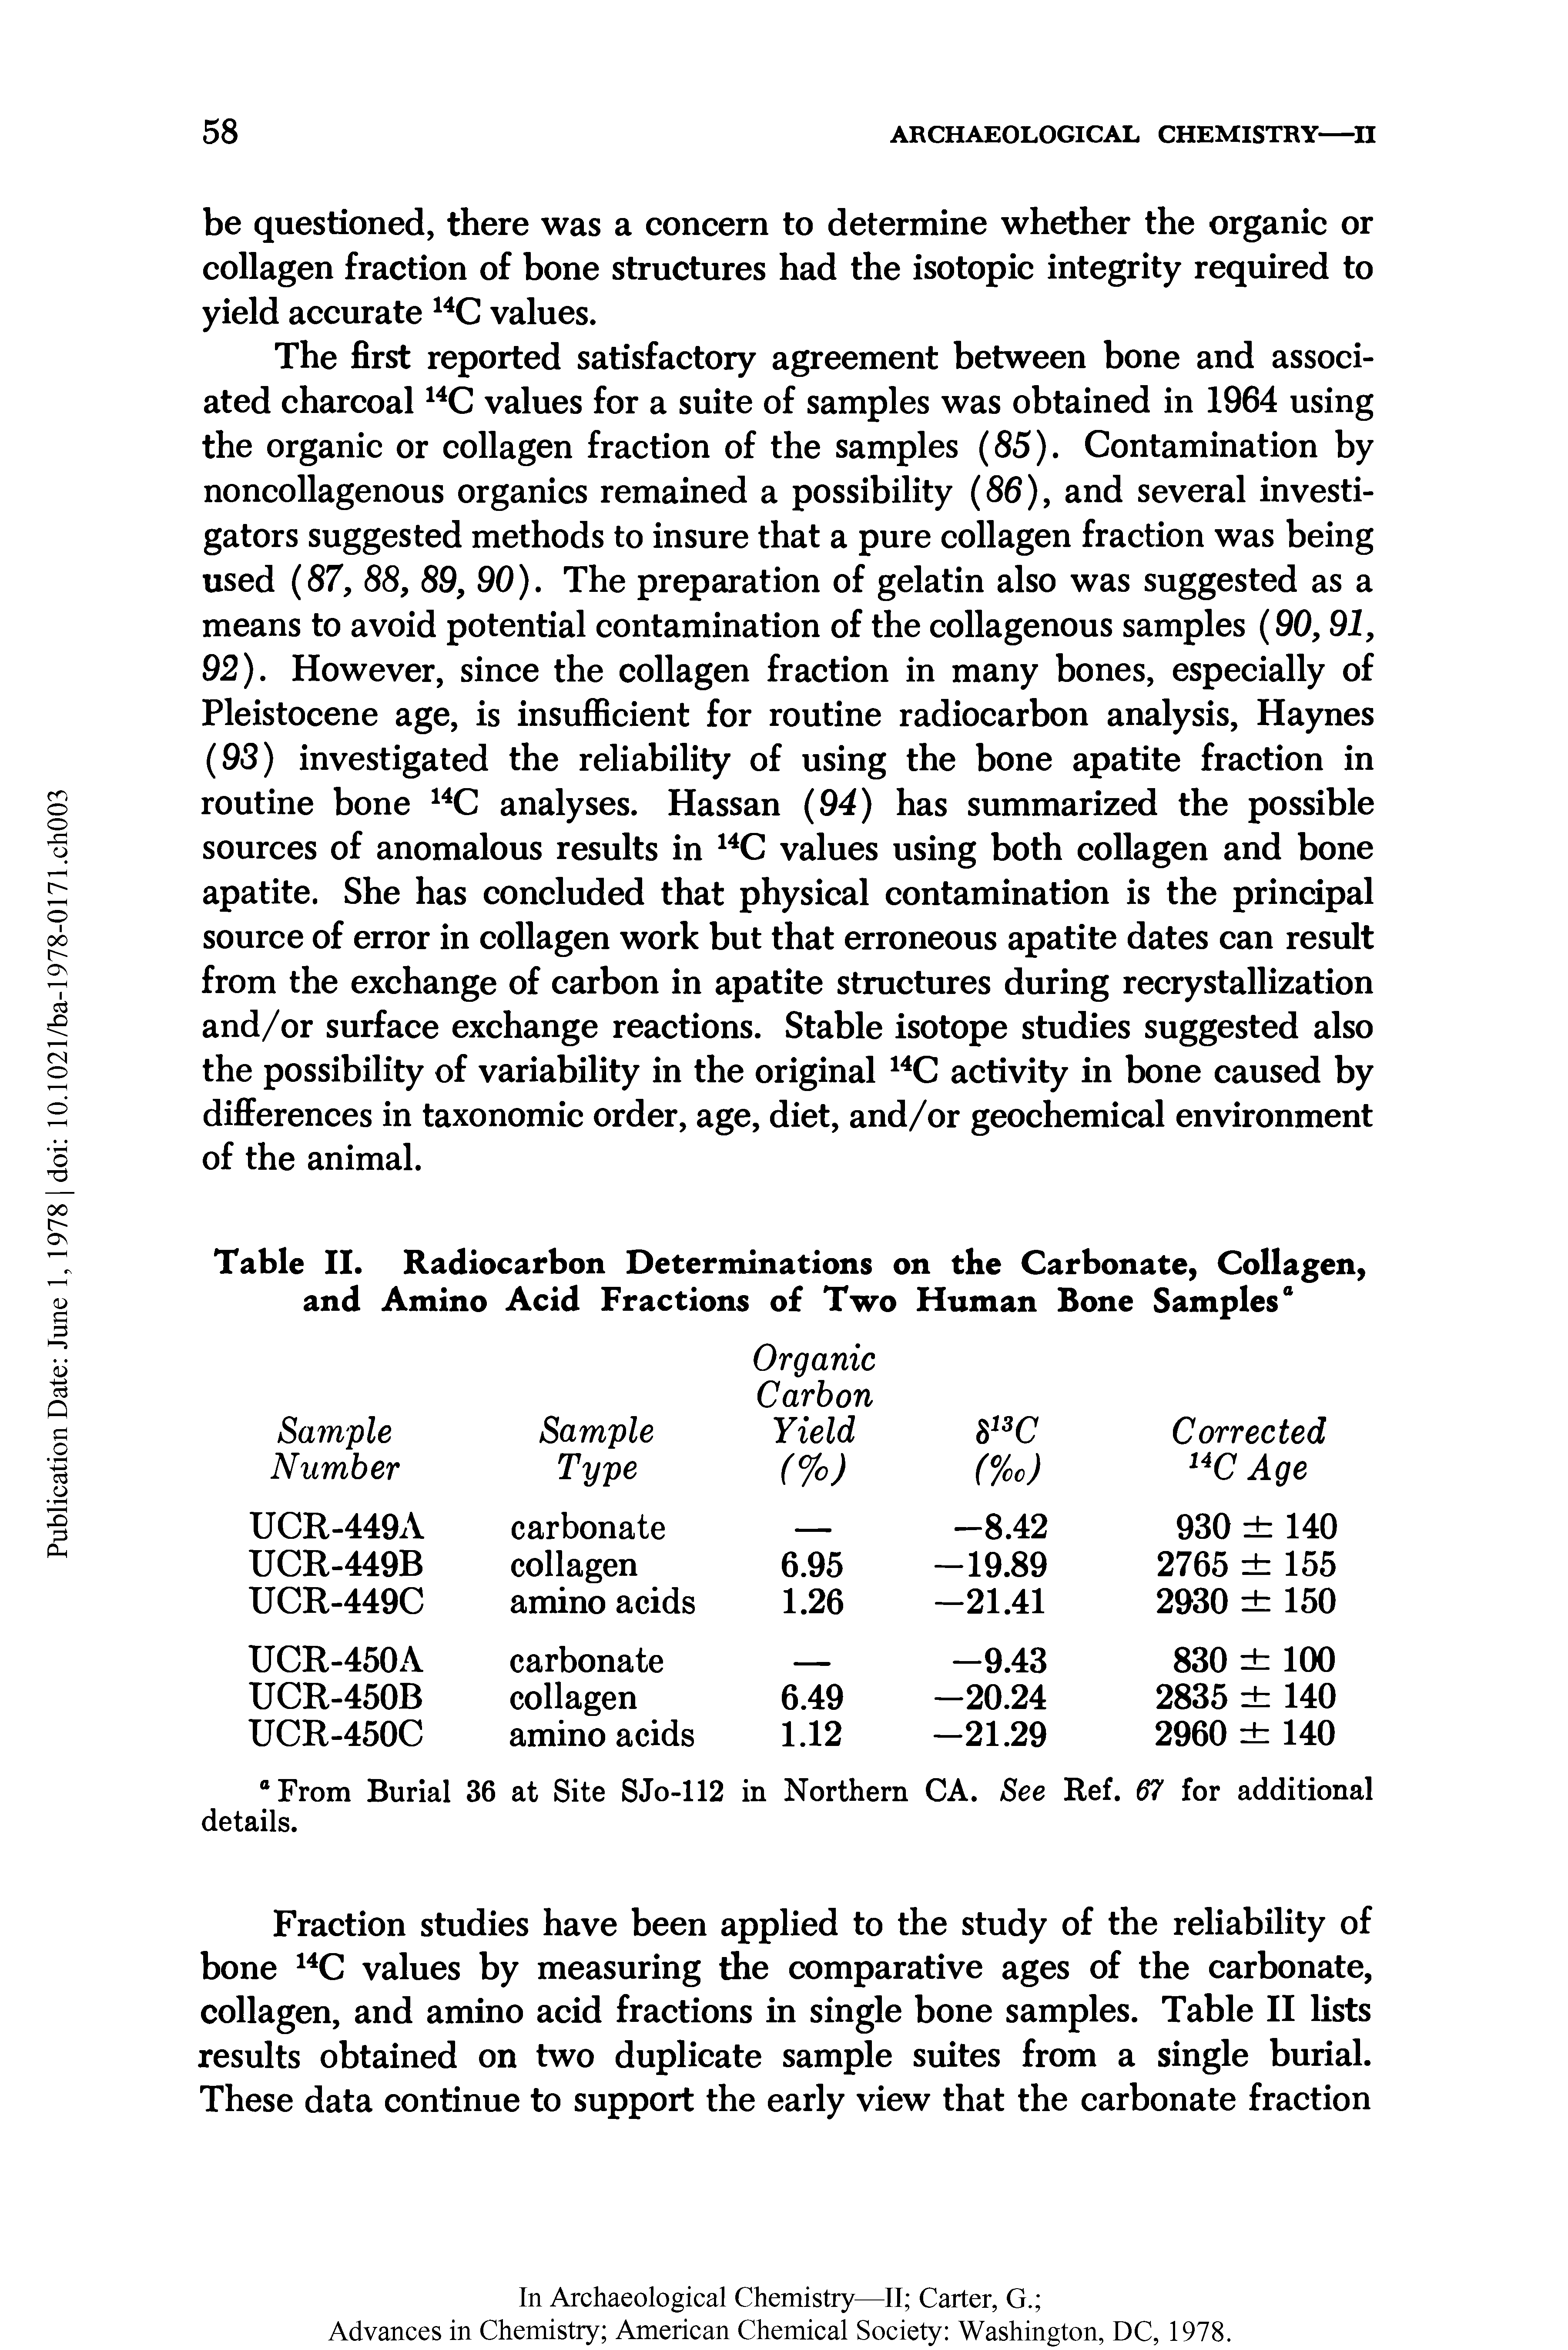 Table II. Radiocarbon Determinations on the Carbonate, Collagen, and Amino Acid Fractions of Two Human Bone Samples...